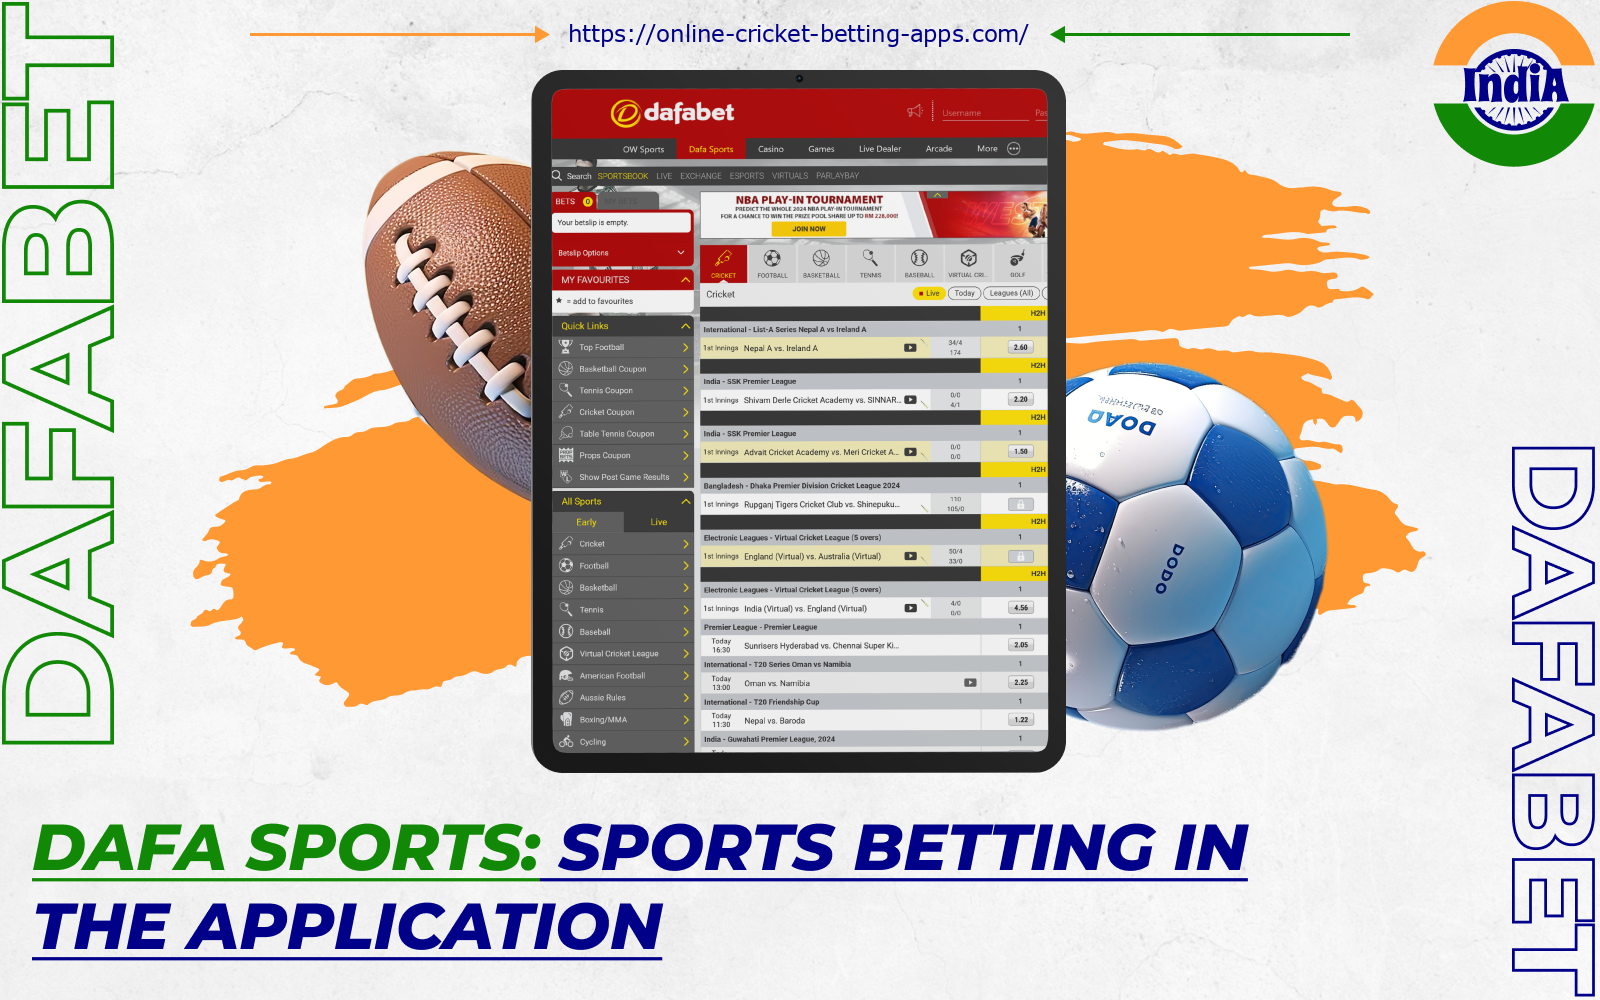 The Dafa India sports app brings together a full range of betting options on over 30 popular sports disciplines